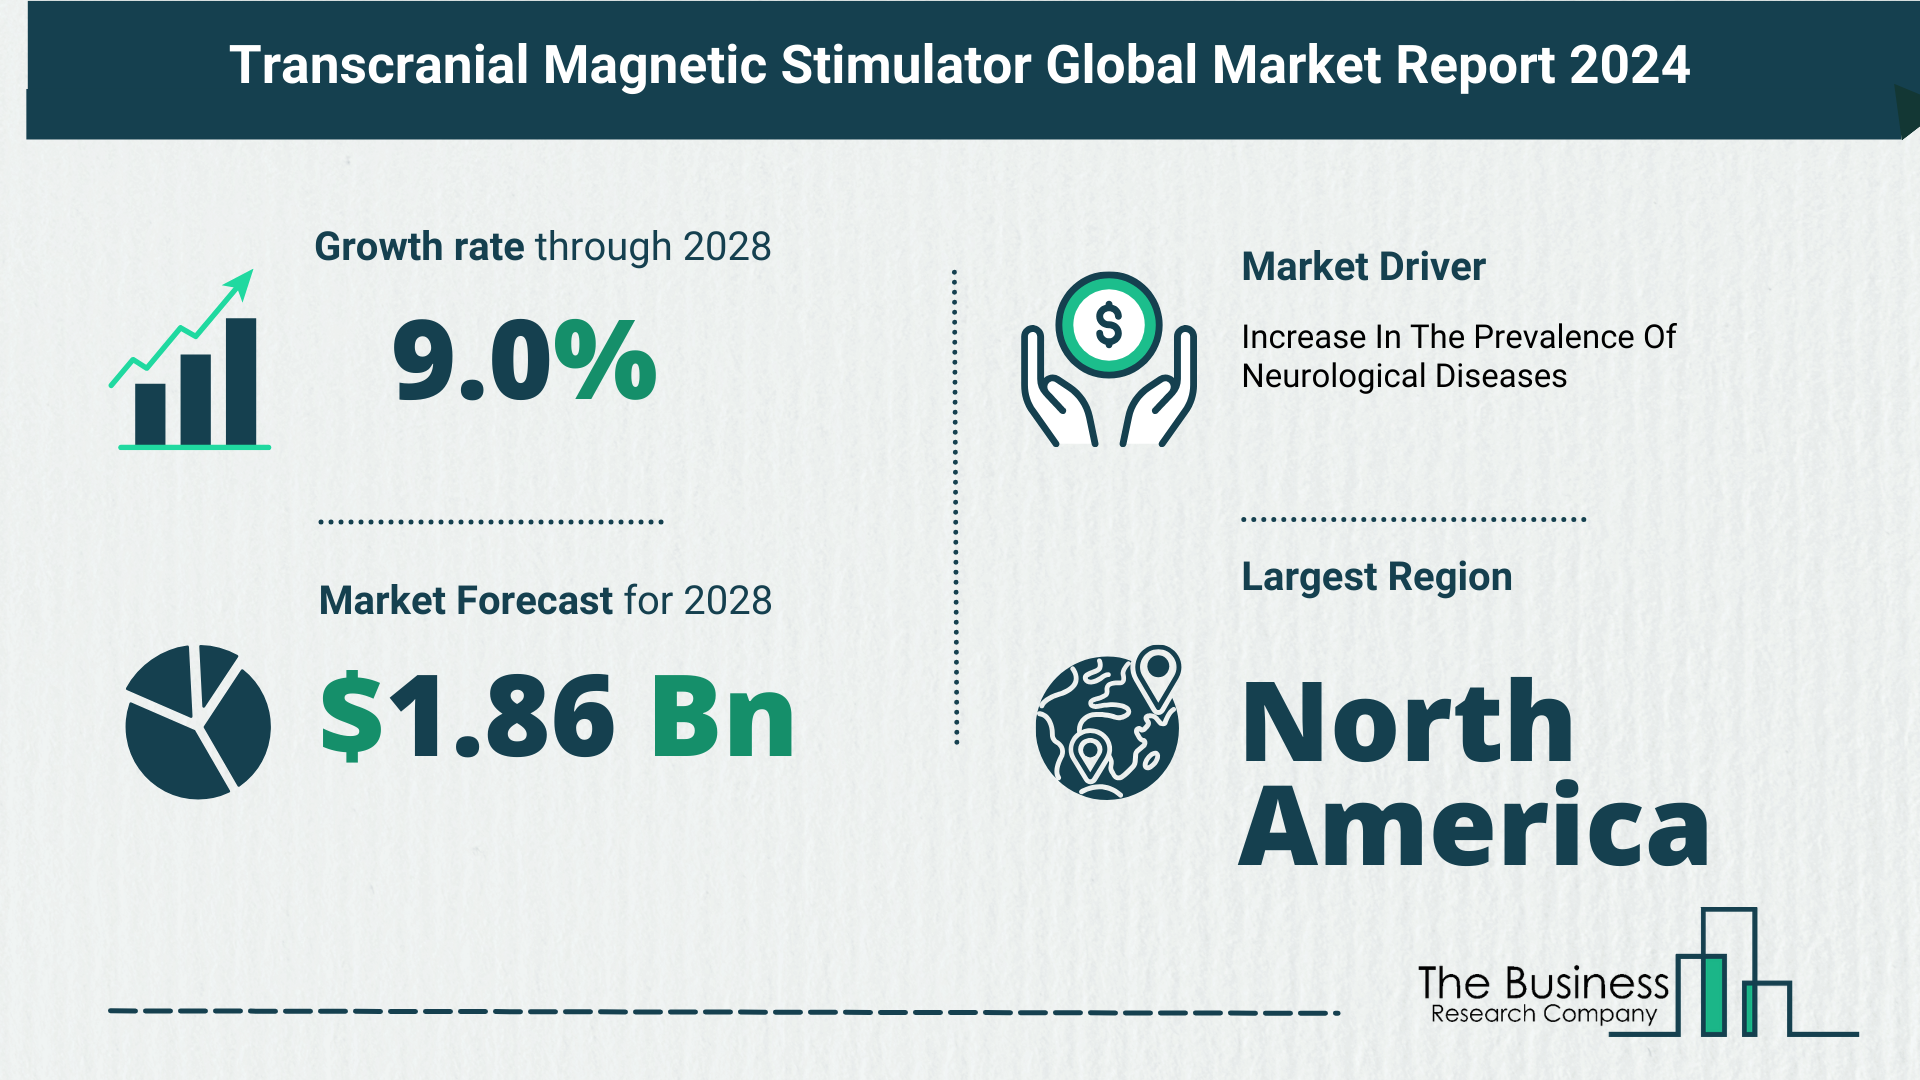 Global Transcranial Magnetic Stimulator Market Analysis: Estimated Market Size And Growth Rate